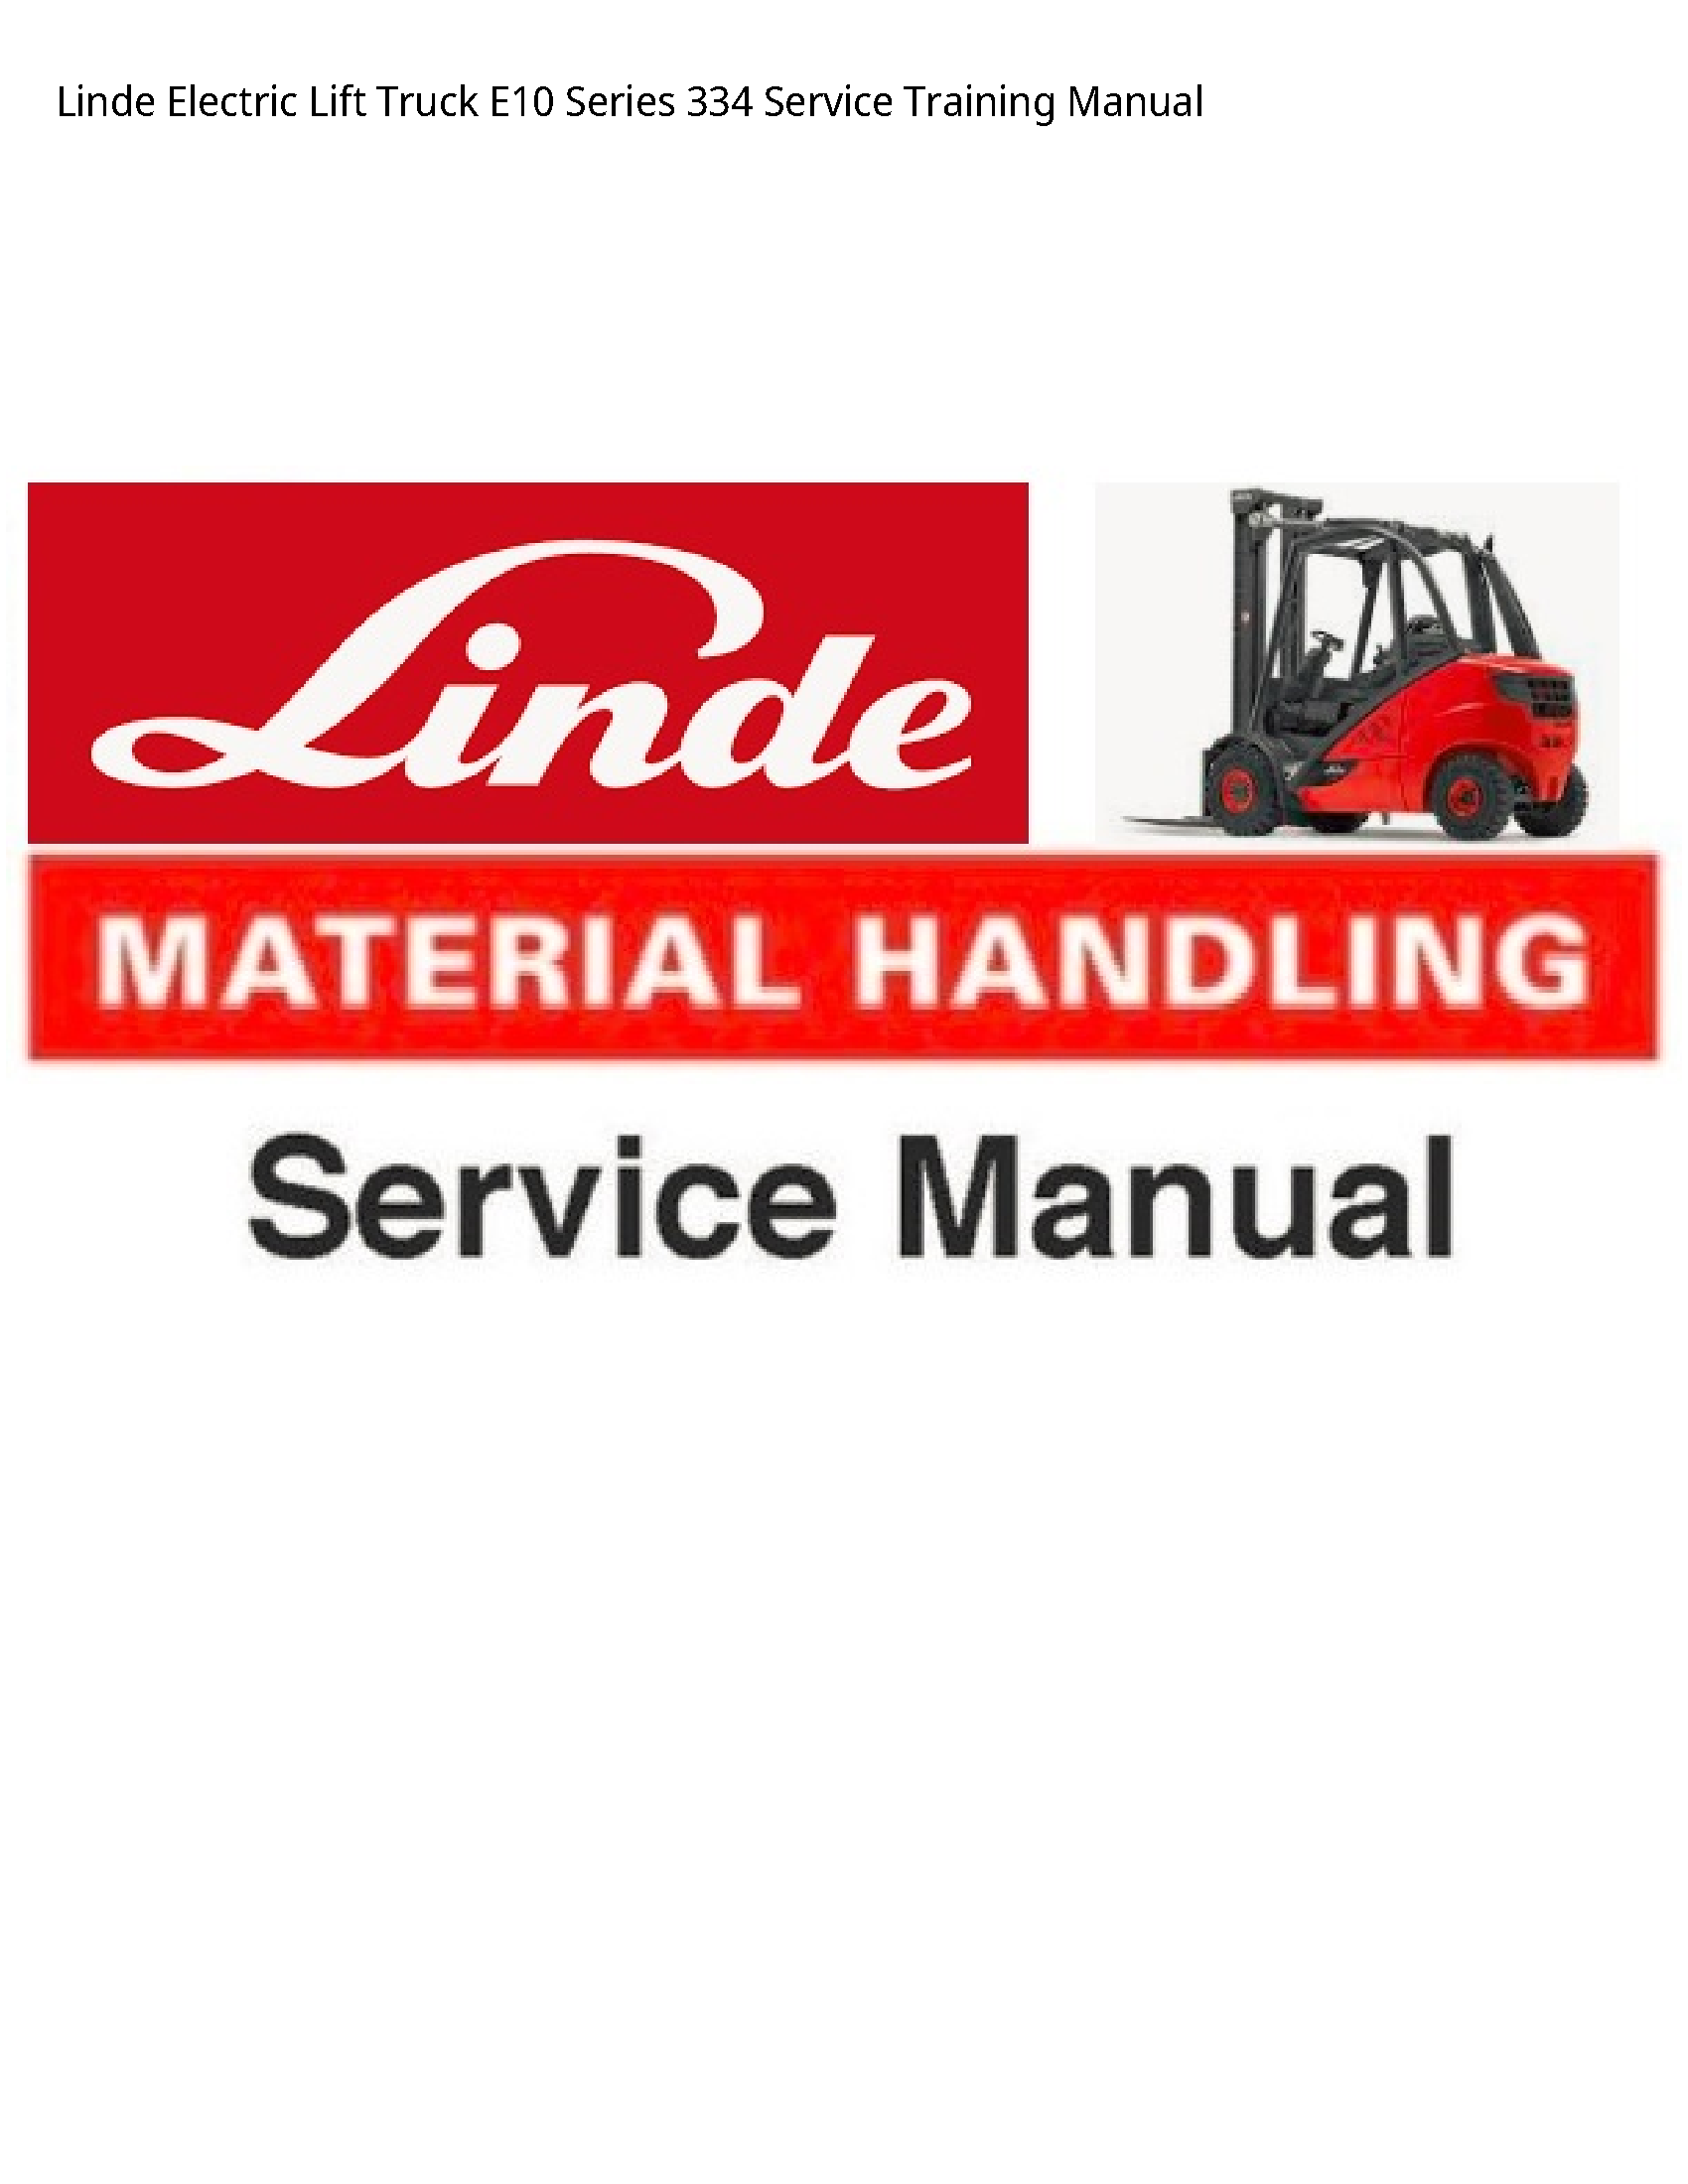 Linde E10 Electric Lift Truck Series Service Training manual